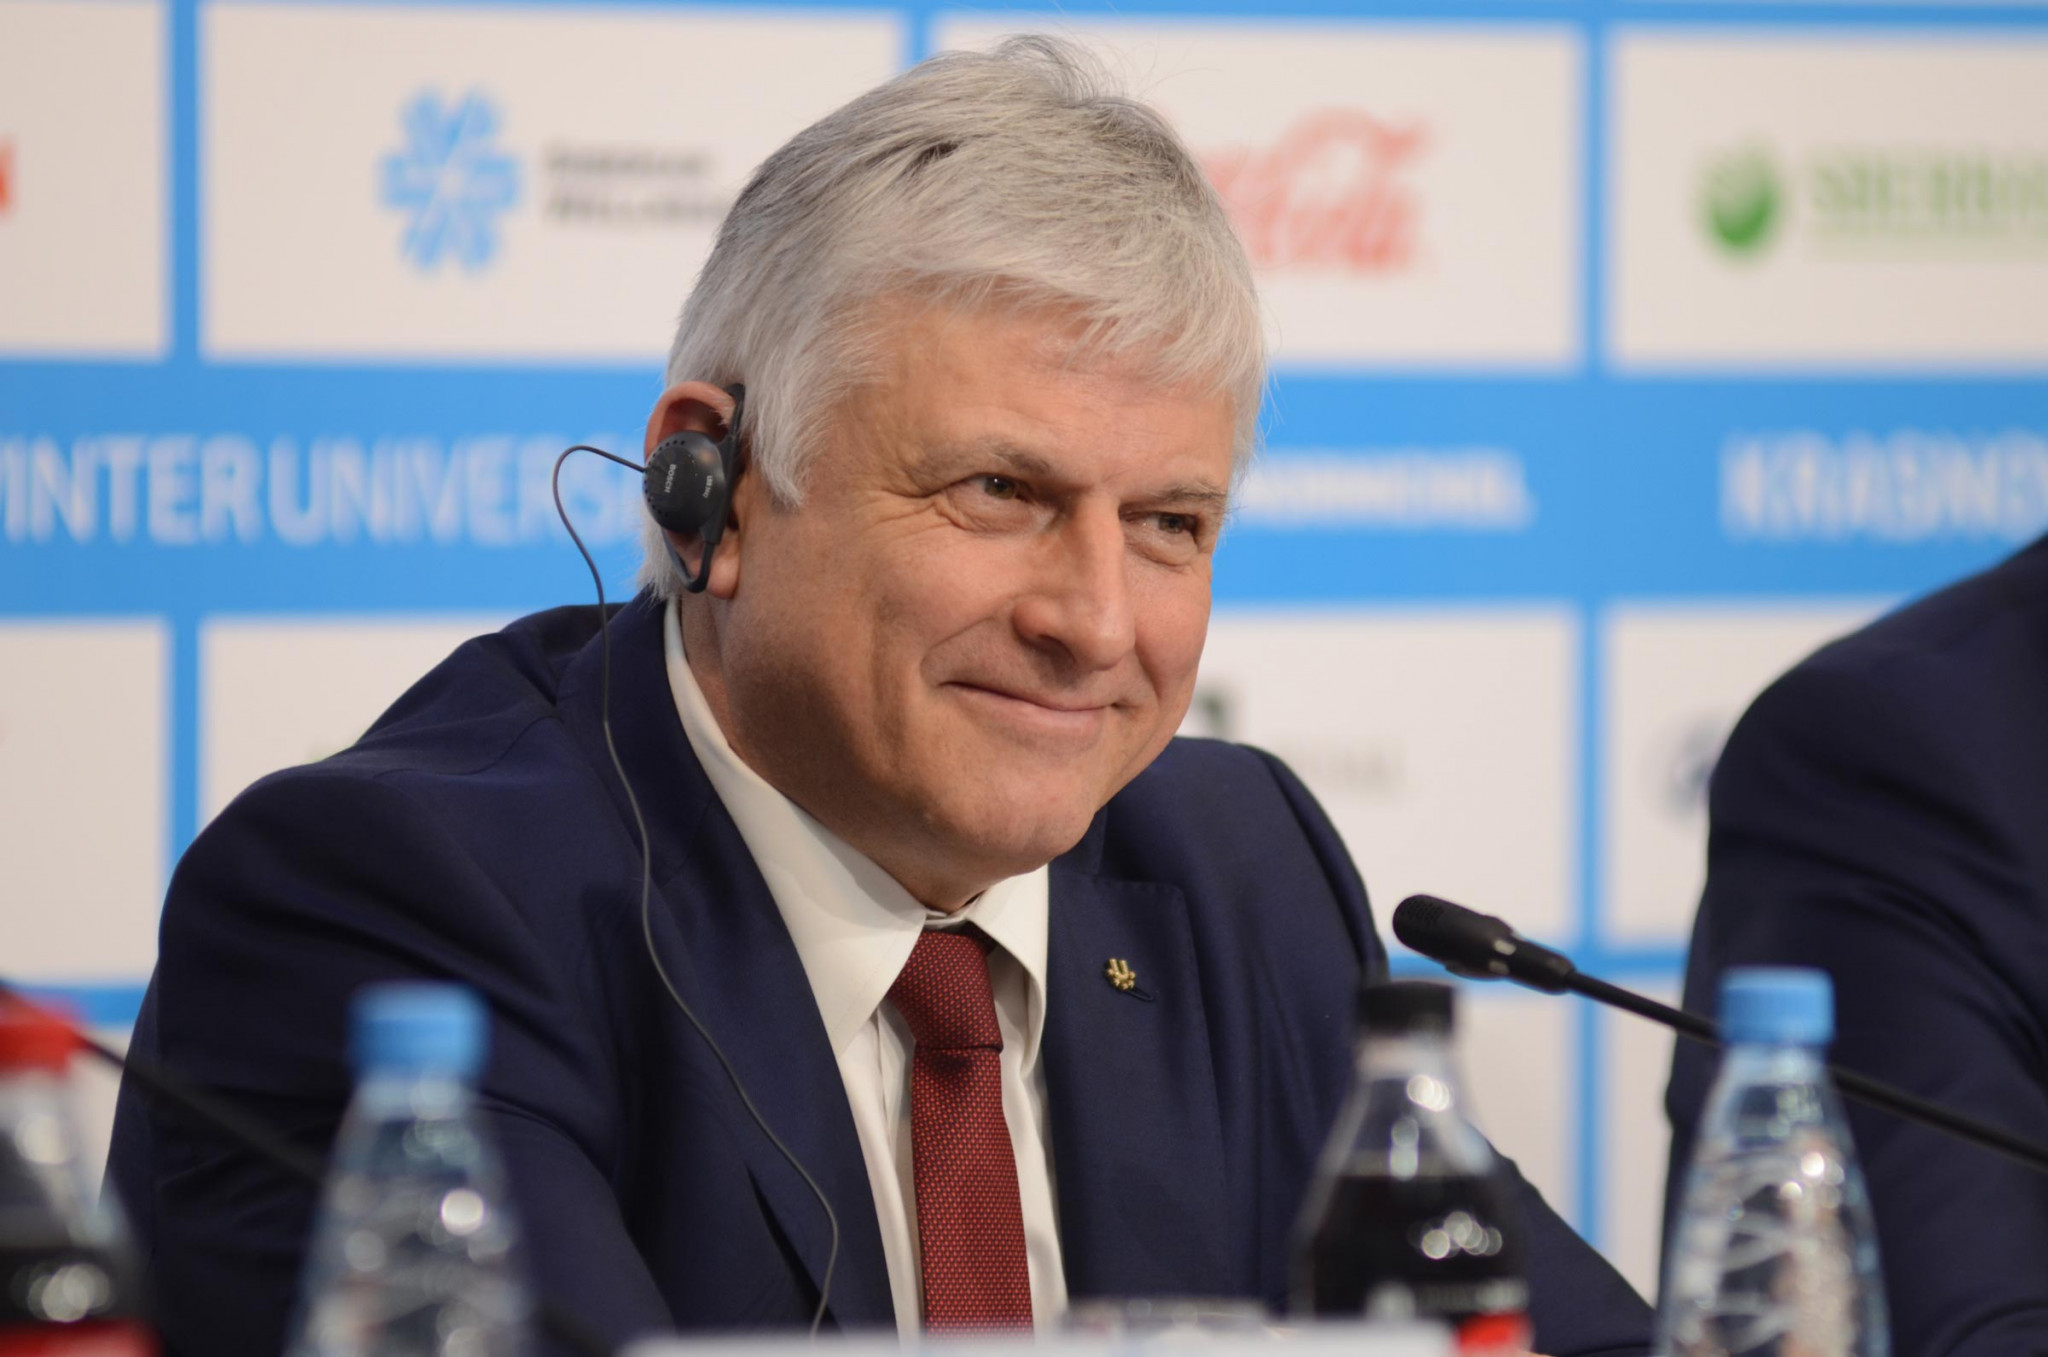 FISU's secretary general and chief executive, Eric Saintrond, discussed how the Universiade could be used as a launchpad by Krasnoyarsk to host larger events ©Krasnoyarsk 2019